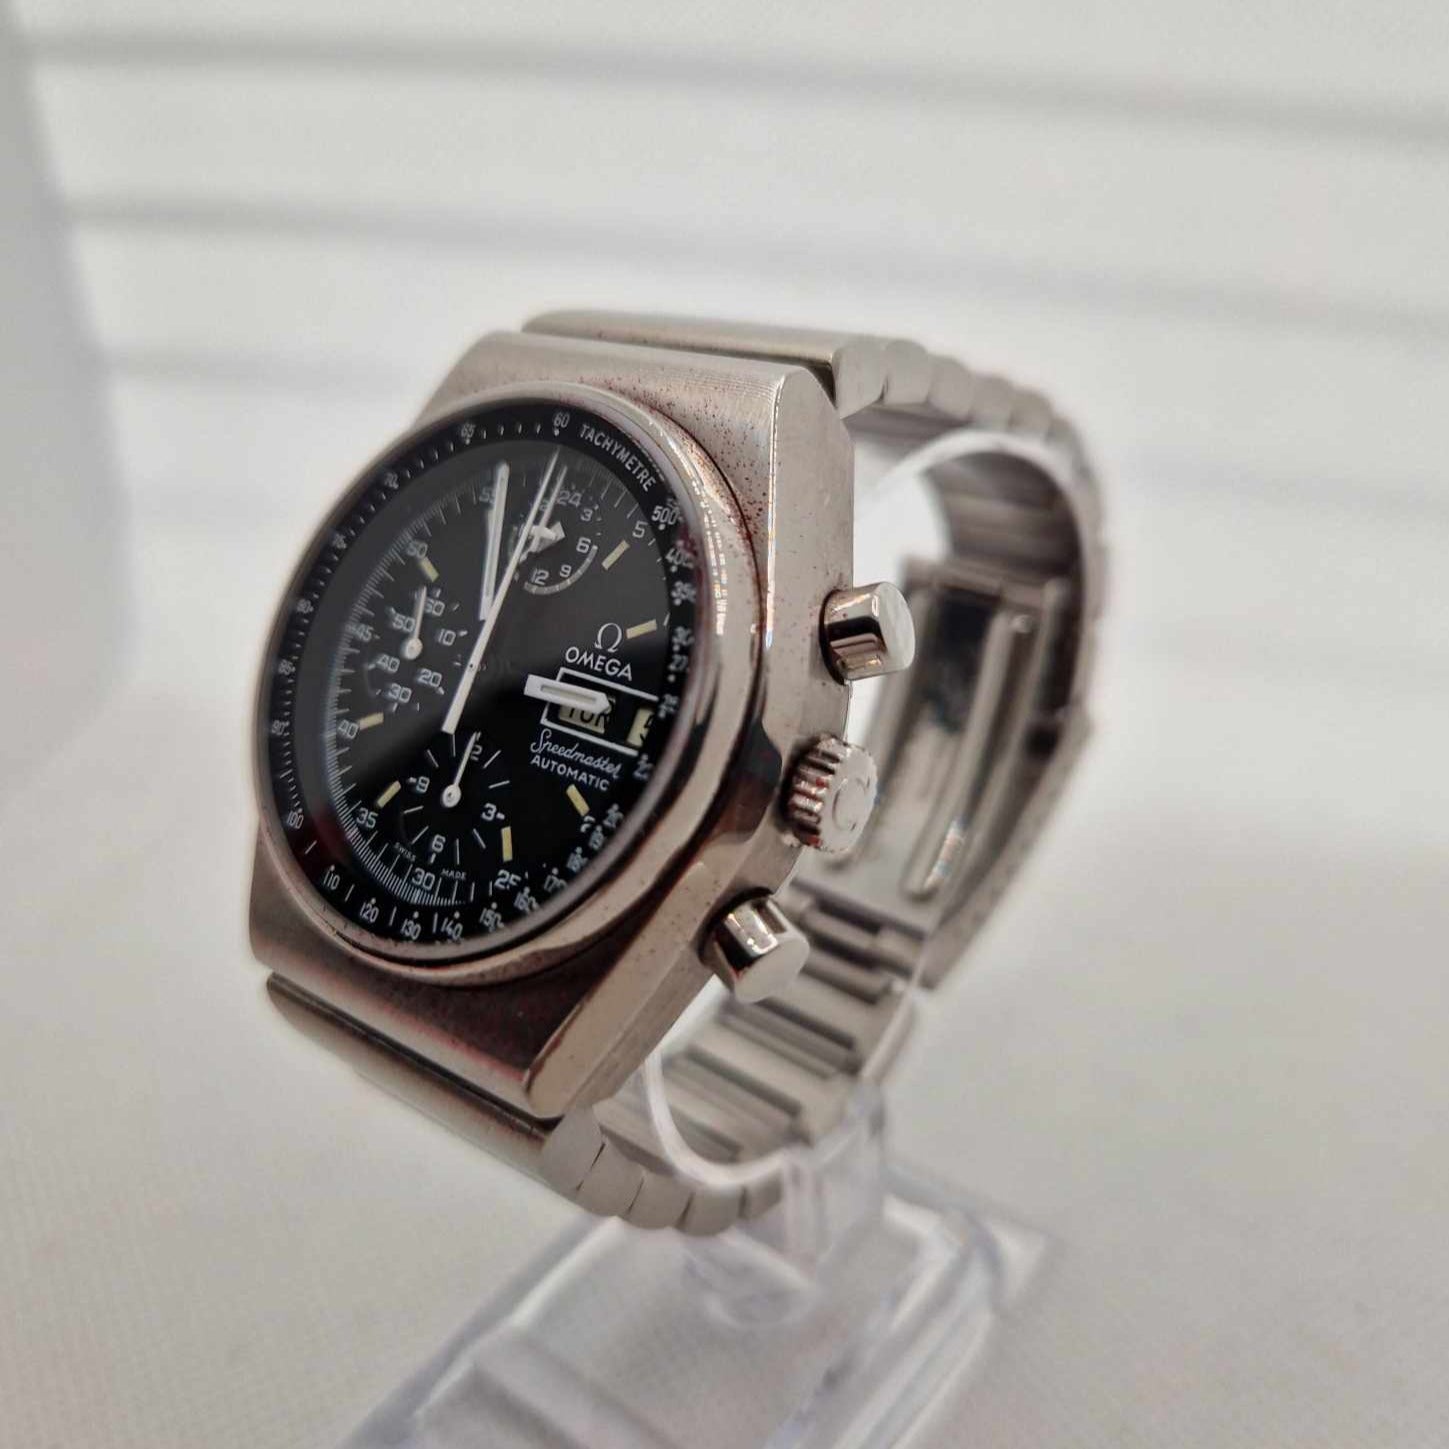 Side profile highlighting the pushers and crown of the Vintage Omega Speedmaster Mark 4.5.